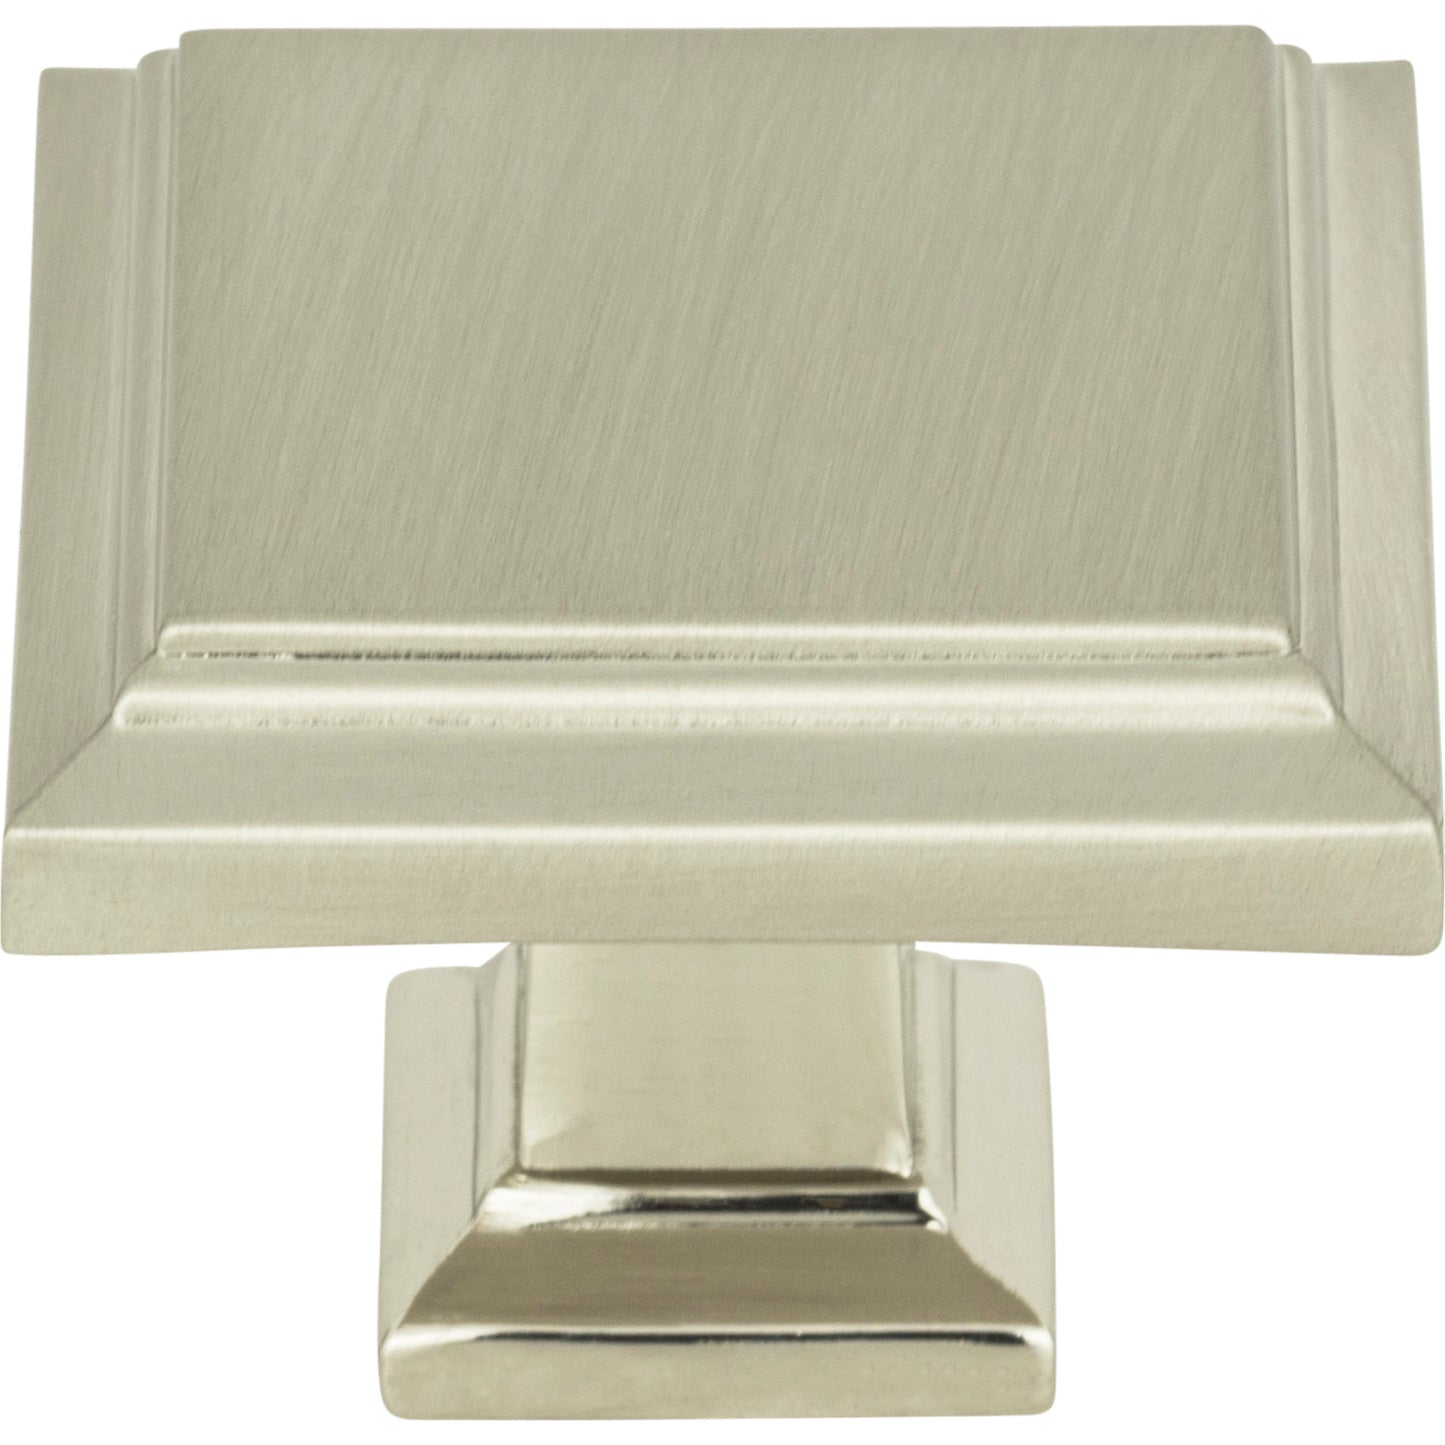 ATLAS 289-BRN Sutton Place Square Knob 1 1/4 Inch Brushed Nickel